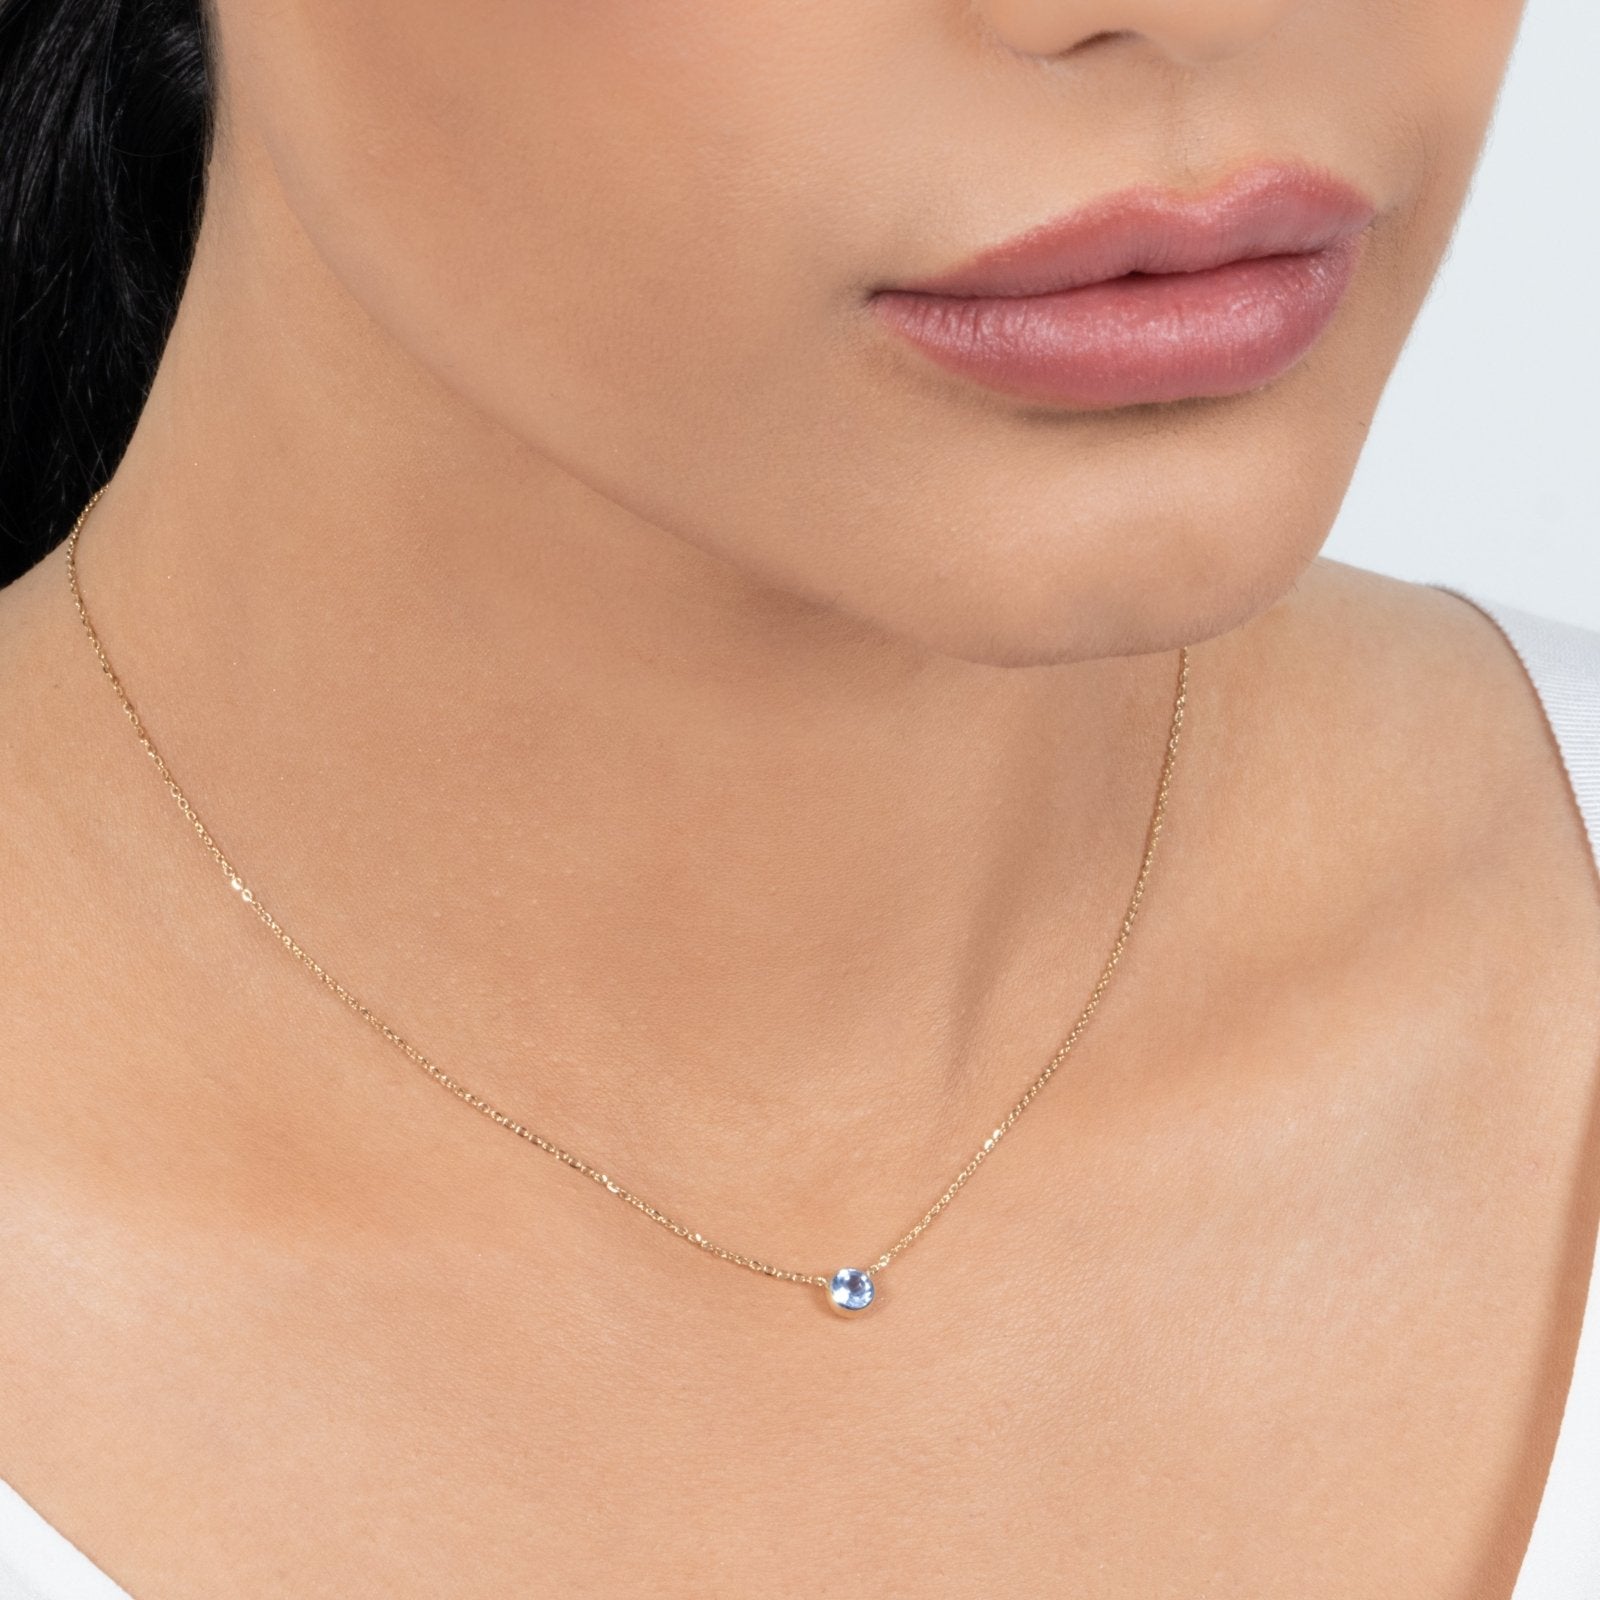 Blue Topaz Station Necklace Bezel Set in 14k Gold Necklaces Estella Collection #product_description# 18423 14k Birthstone Blue Gemstone #tag4# #tag5# #tag6# #tag7# #tag8# #tag9# #tag10# 3MM